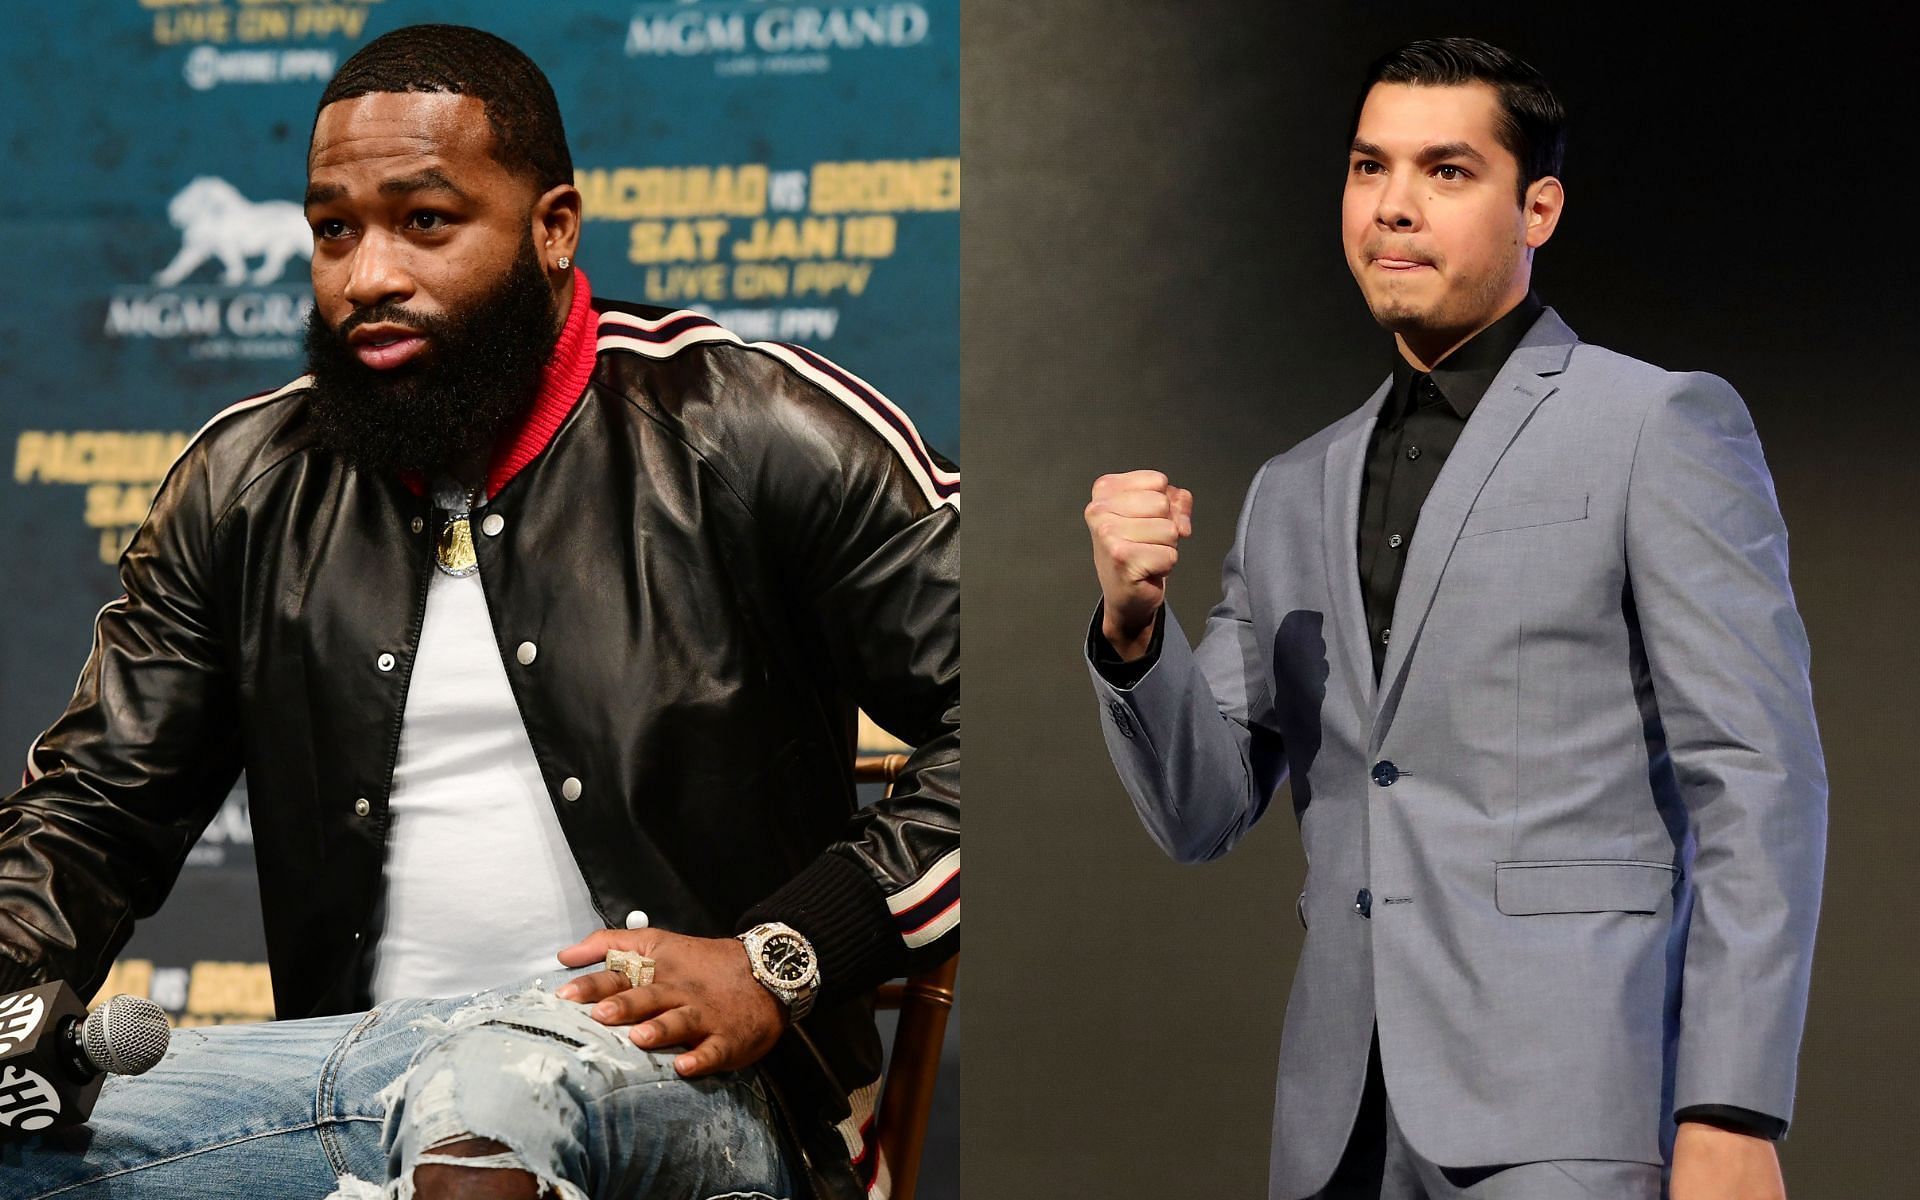 Adrien Broner (left) and Omar Figueroa (right) (Image credits Getty Images)